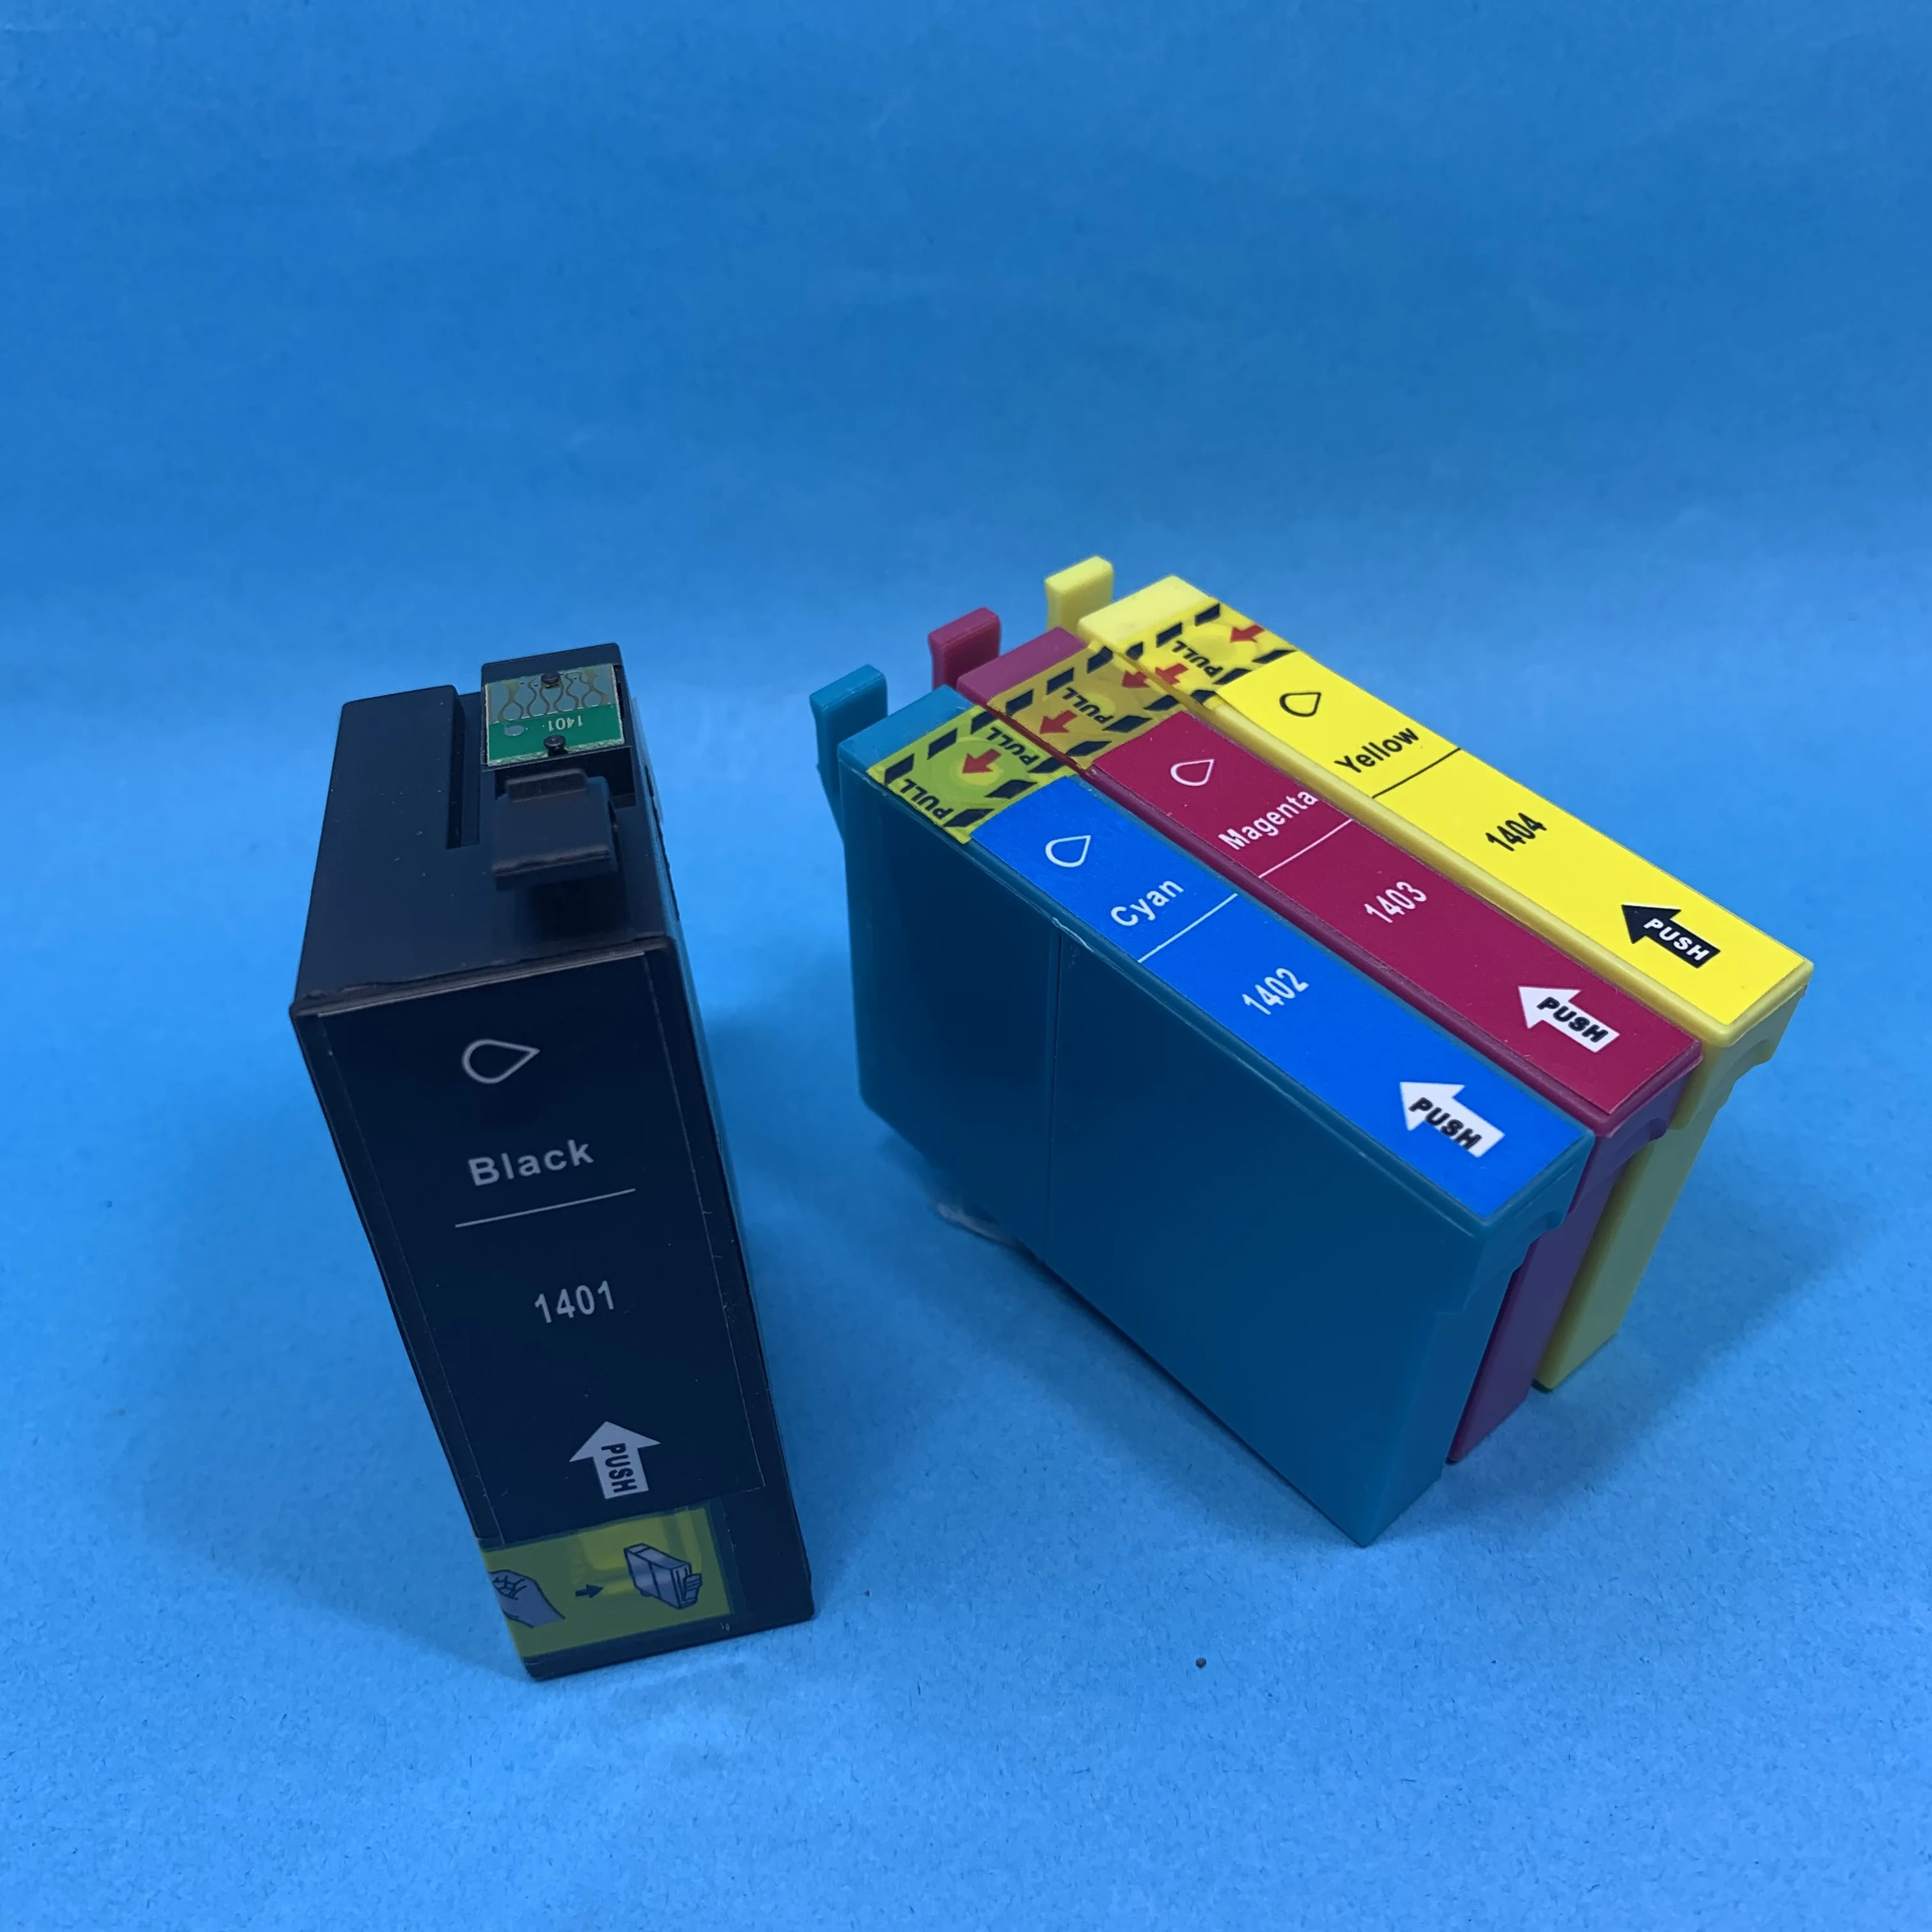 

YOTAT Compatible Ink cartridge T1401 T1402 T1403 T1404 for Epson TX560WD NX635 60 525 545 625 630 633 645 840 845 etc.